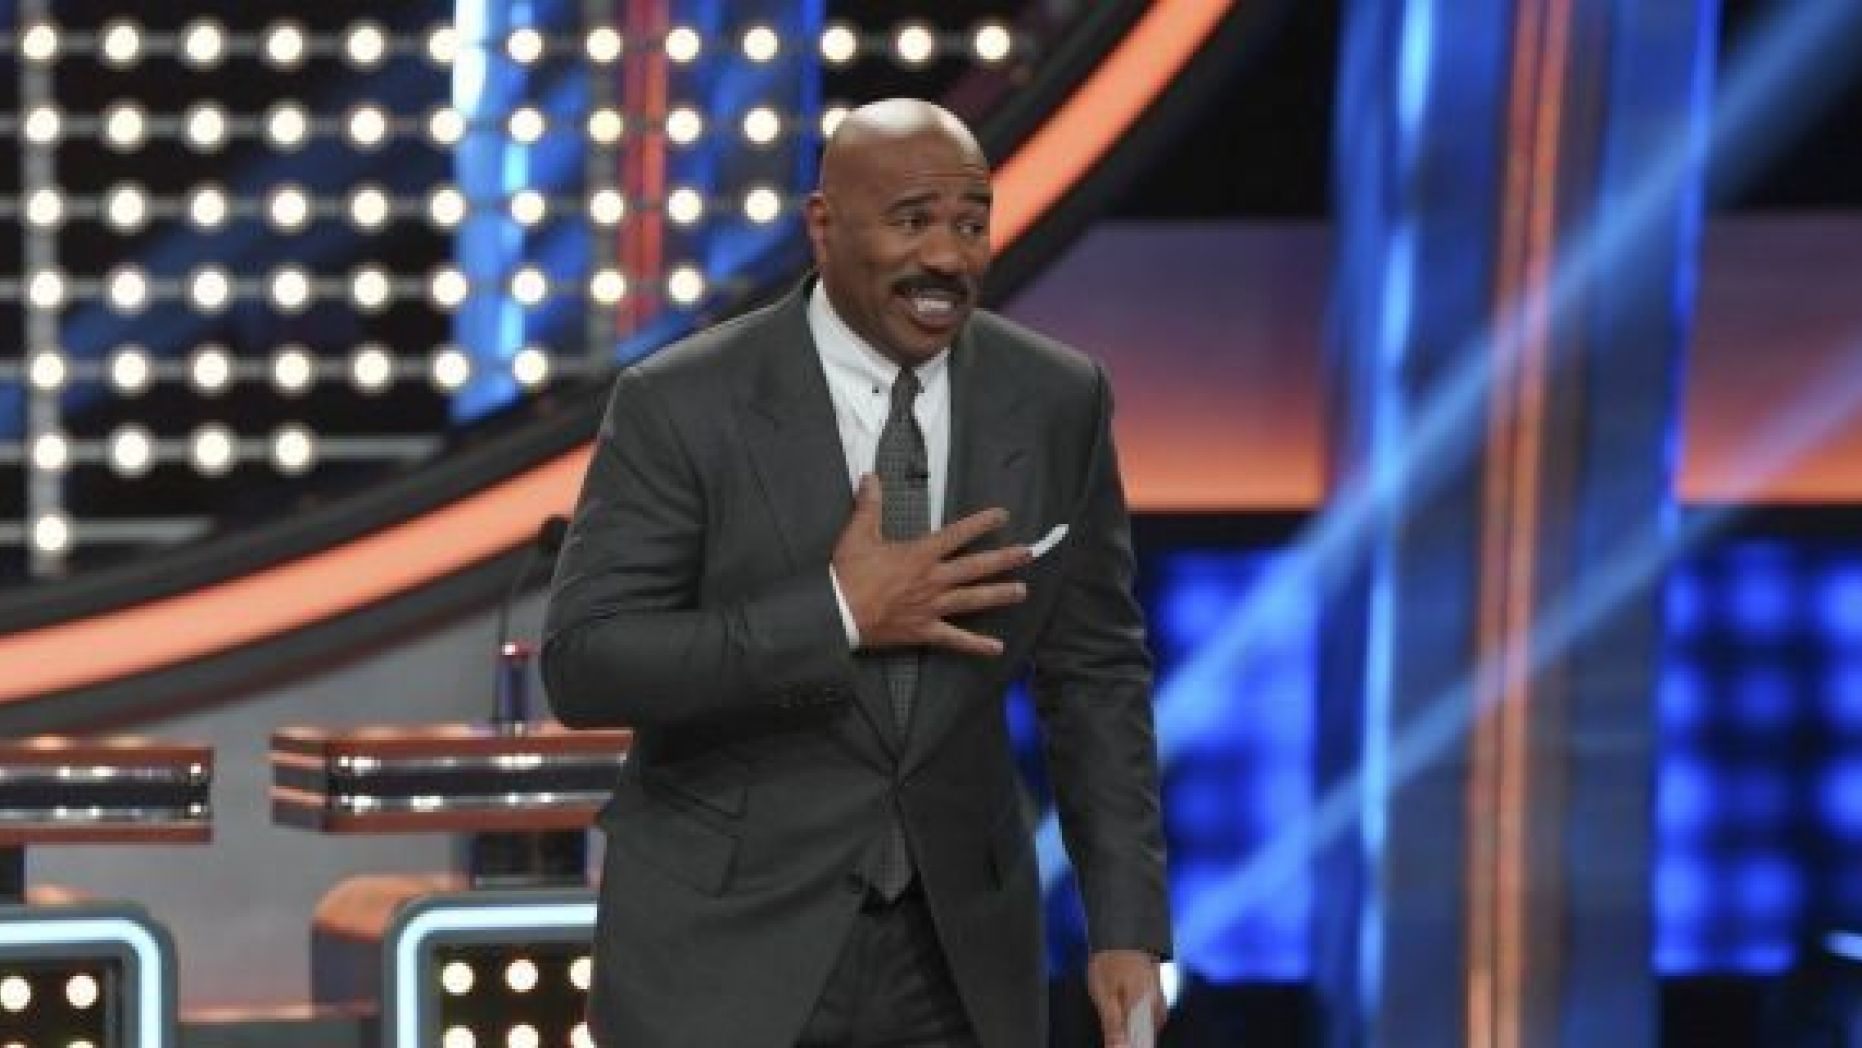 Steve Harvey is set to host the 2018 Miss Universe competition on December 16.